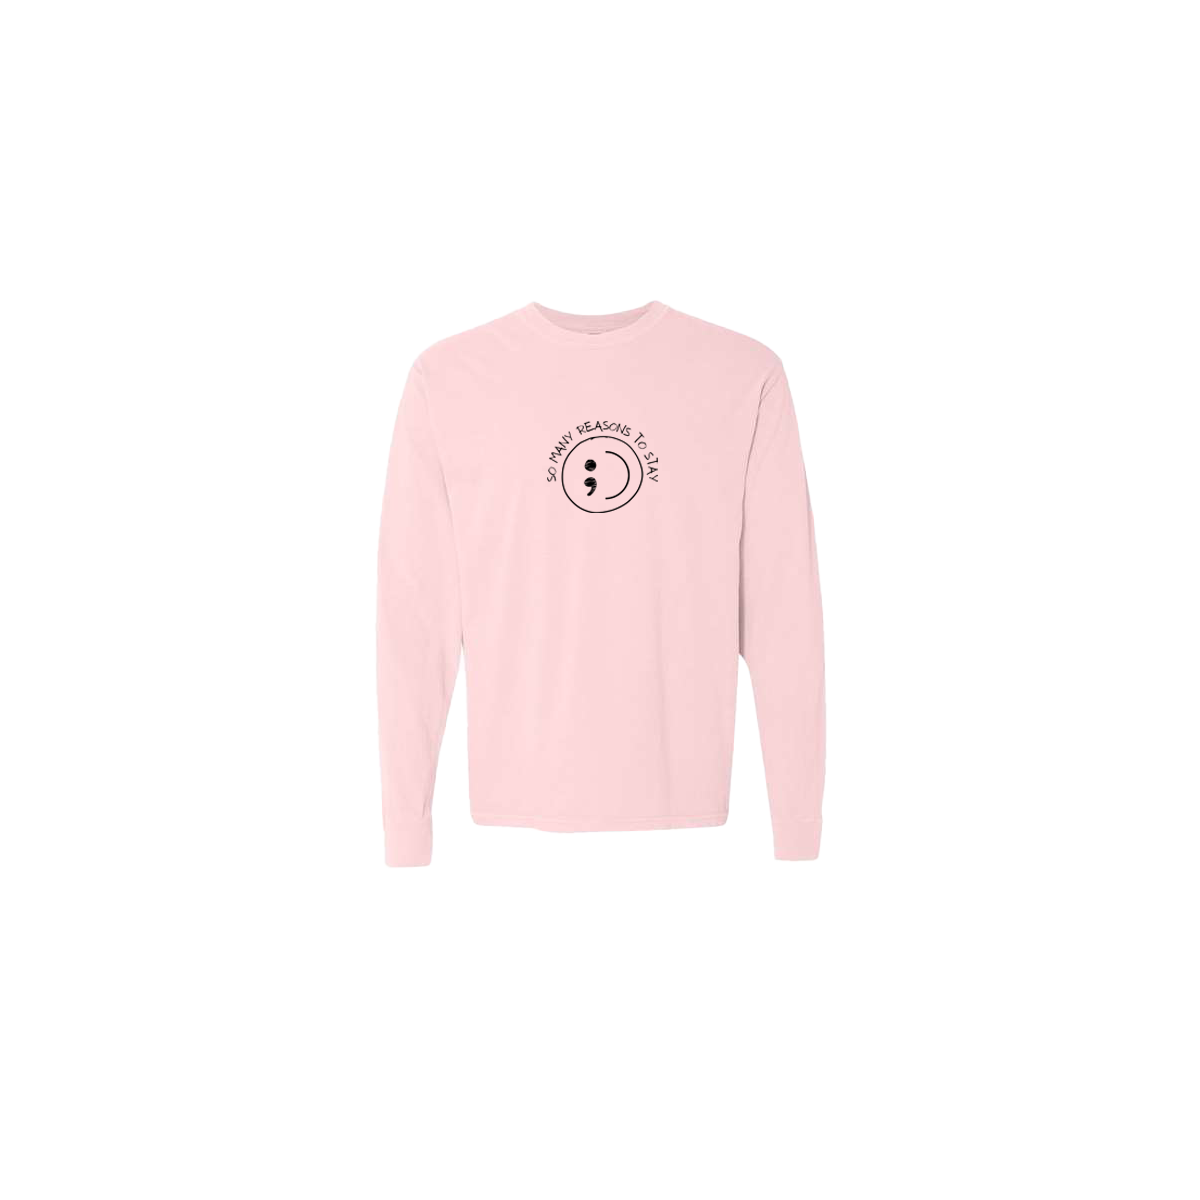 So Many Reasons to Stay Embroidered Pink Long Sleeve Tshirt - Mental Health Awareness Clothing